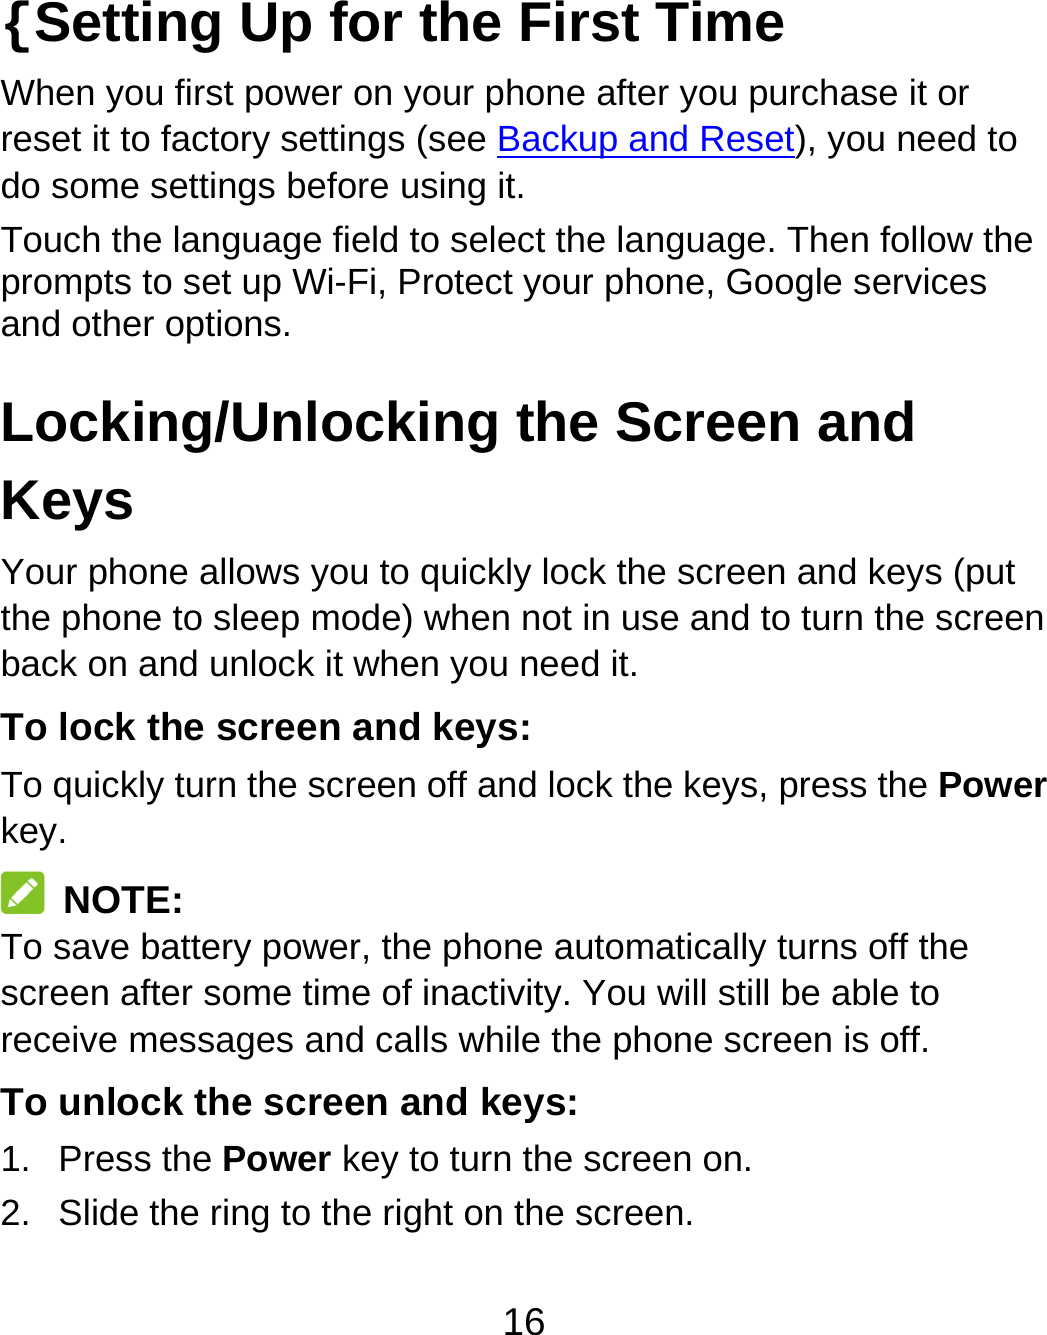 16 {Setting Up for the First Time   When you first power on your phone after you purchase it or reset it to factory settings (see Backup and Reset), you need to do some settings before using it. Touch the language field to select the language. Then follow the prompts to set up Wi-Fi, Protect your phone, Google services and other options. Locking/Unlocking the Screen and Keys Your phone allows you to quickly lock the screen and keys (put the phone to sleep mode) when not in use and to turn the screen back on and unlock it when you need it. To lock the screen and keys: To quickly turn the screen off and lock the keys, press the Power key.  NOTE: To save battery power, the phone automatically turns off the screen after some time of inactivity. You will still be able to receive messages and calls while the phone screen is off. To unlock the screen and keys: 1. Press the Power key to turn the screen on. 2.  Slide the ring to the right on the screen. 